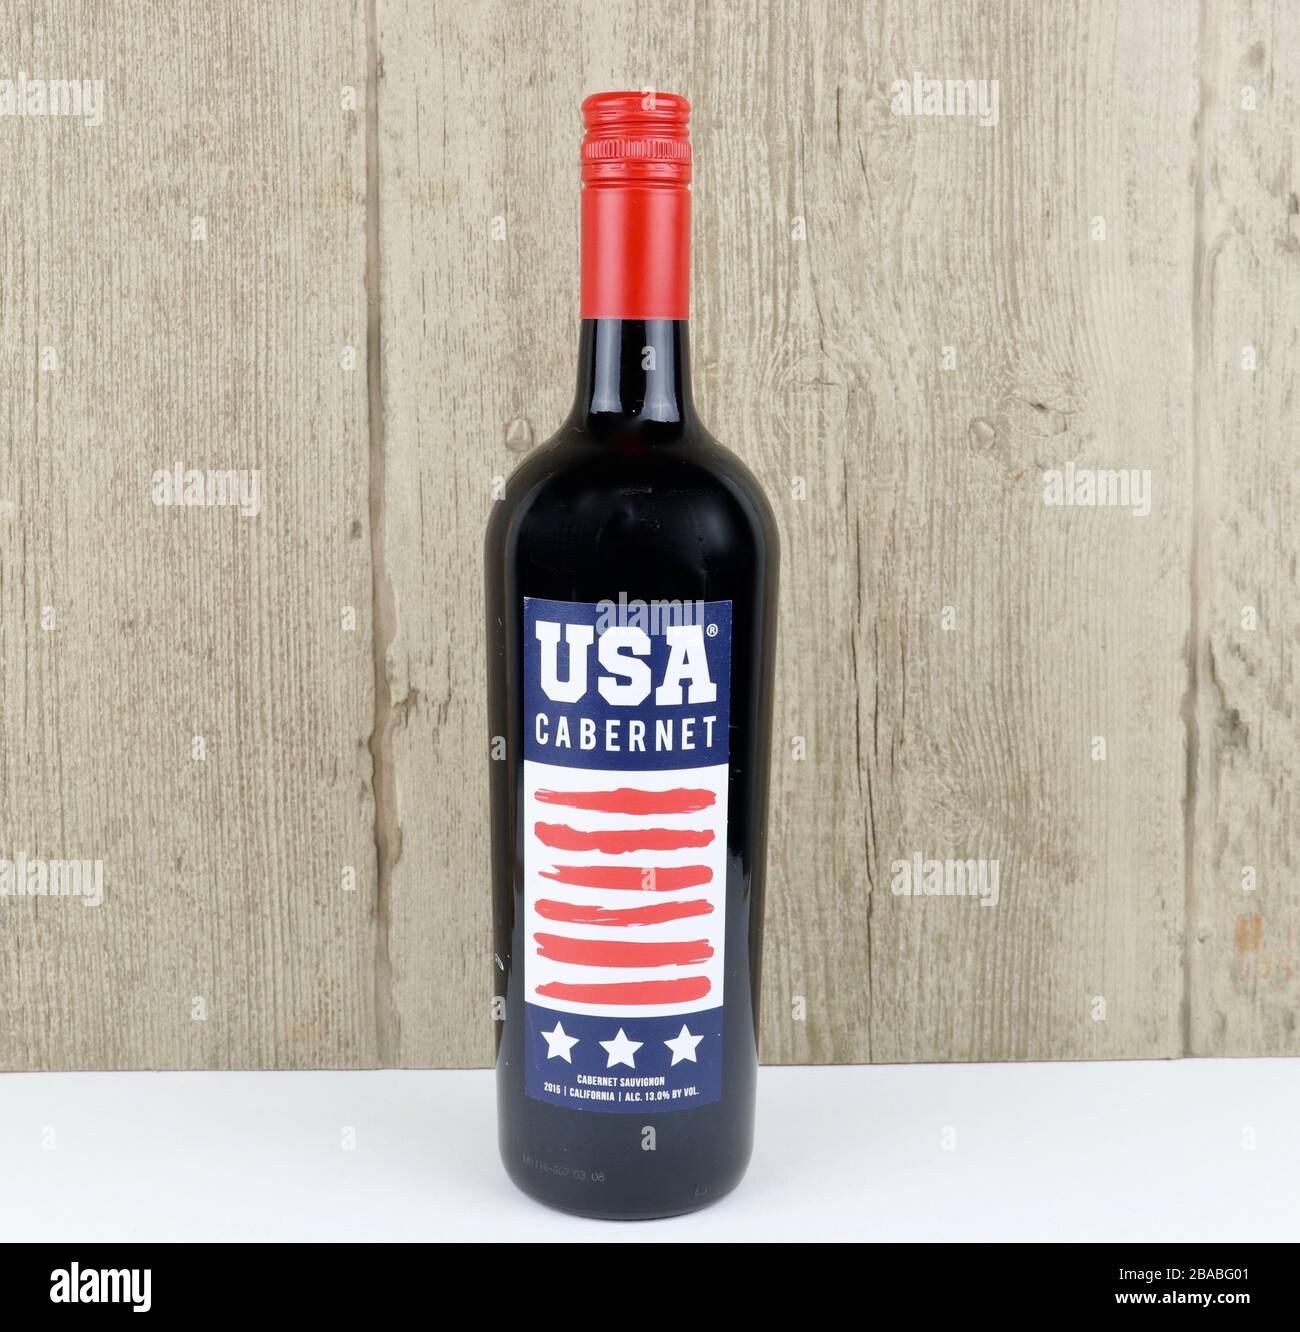 Spencer, Wisconsin, U.S.A. , March, 25, 2020    Bottle of USA Cabernet   USA Cabernet is a product of California, U.S.A. Stock Photo